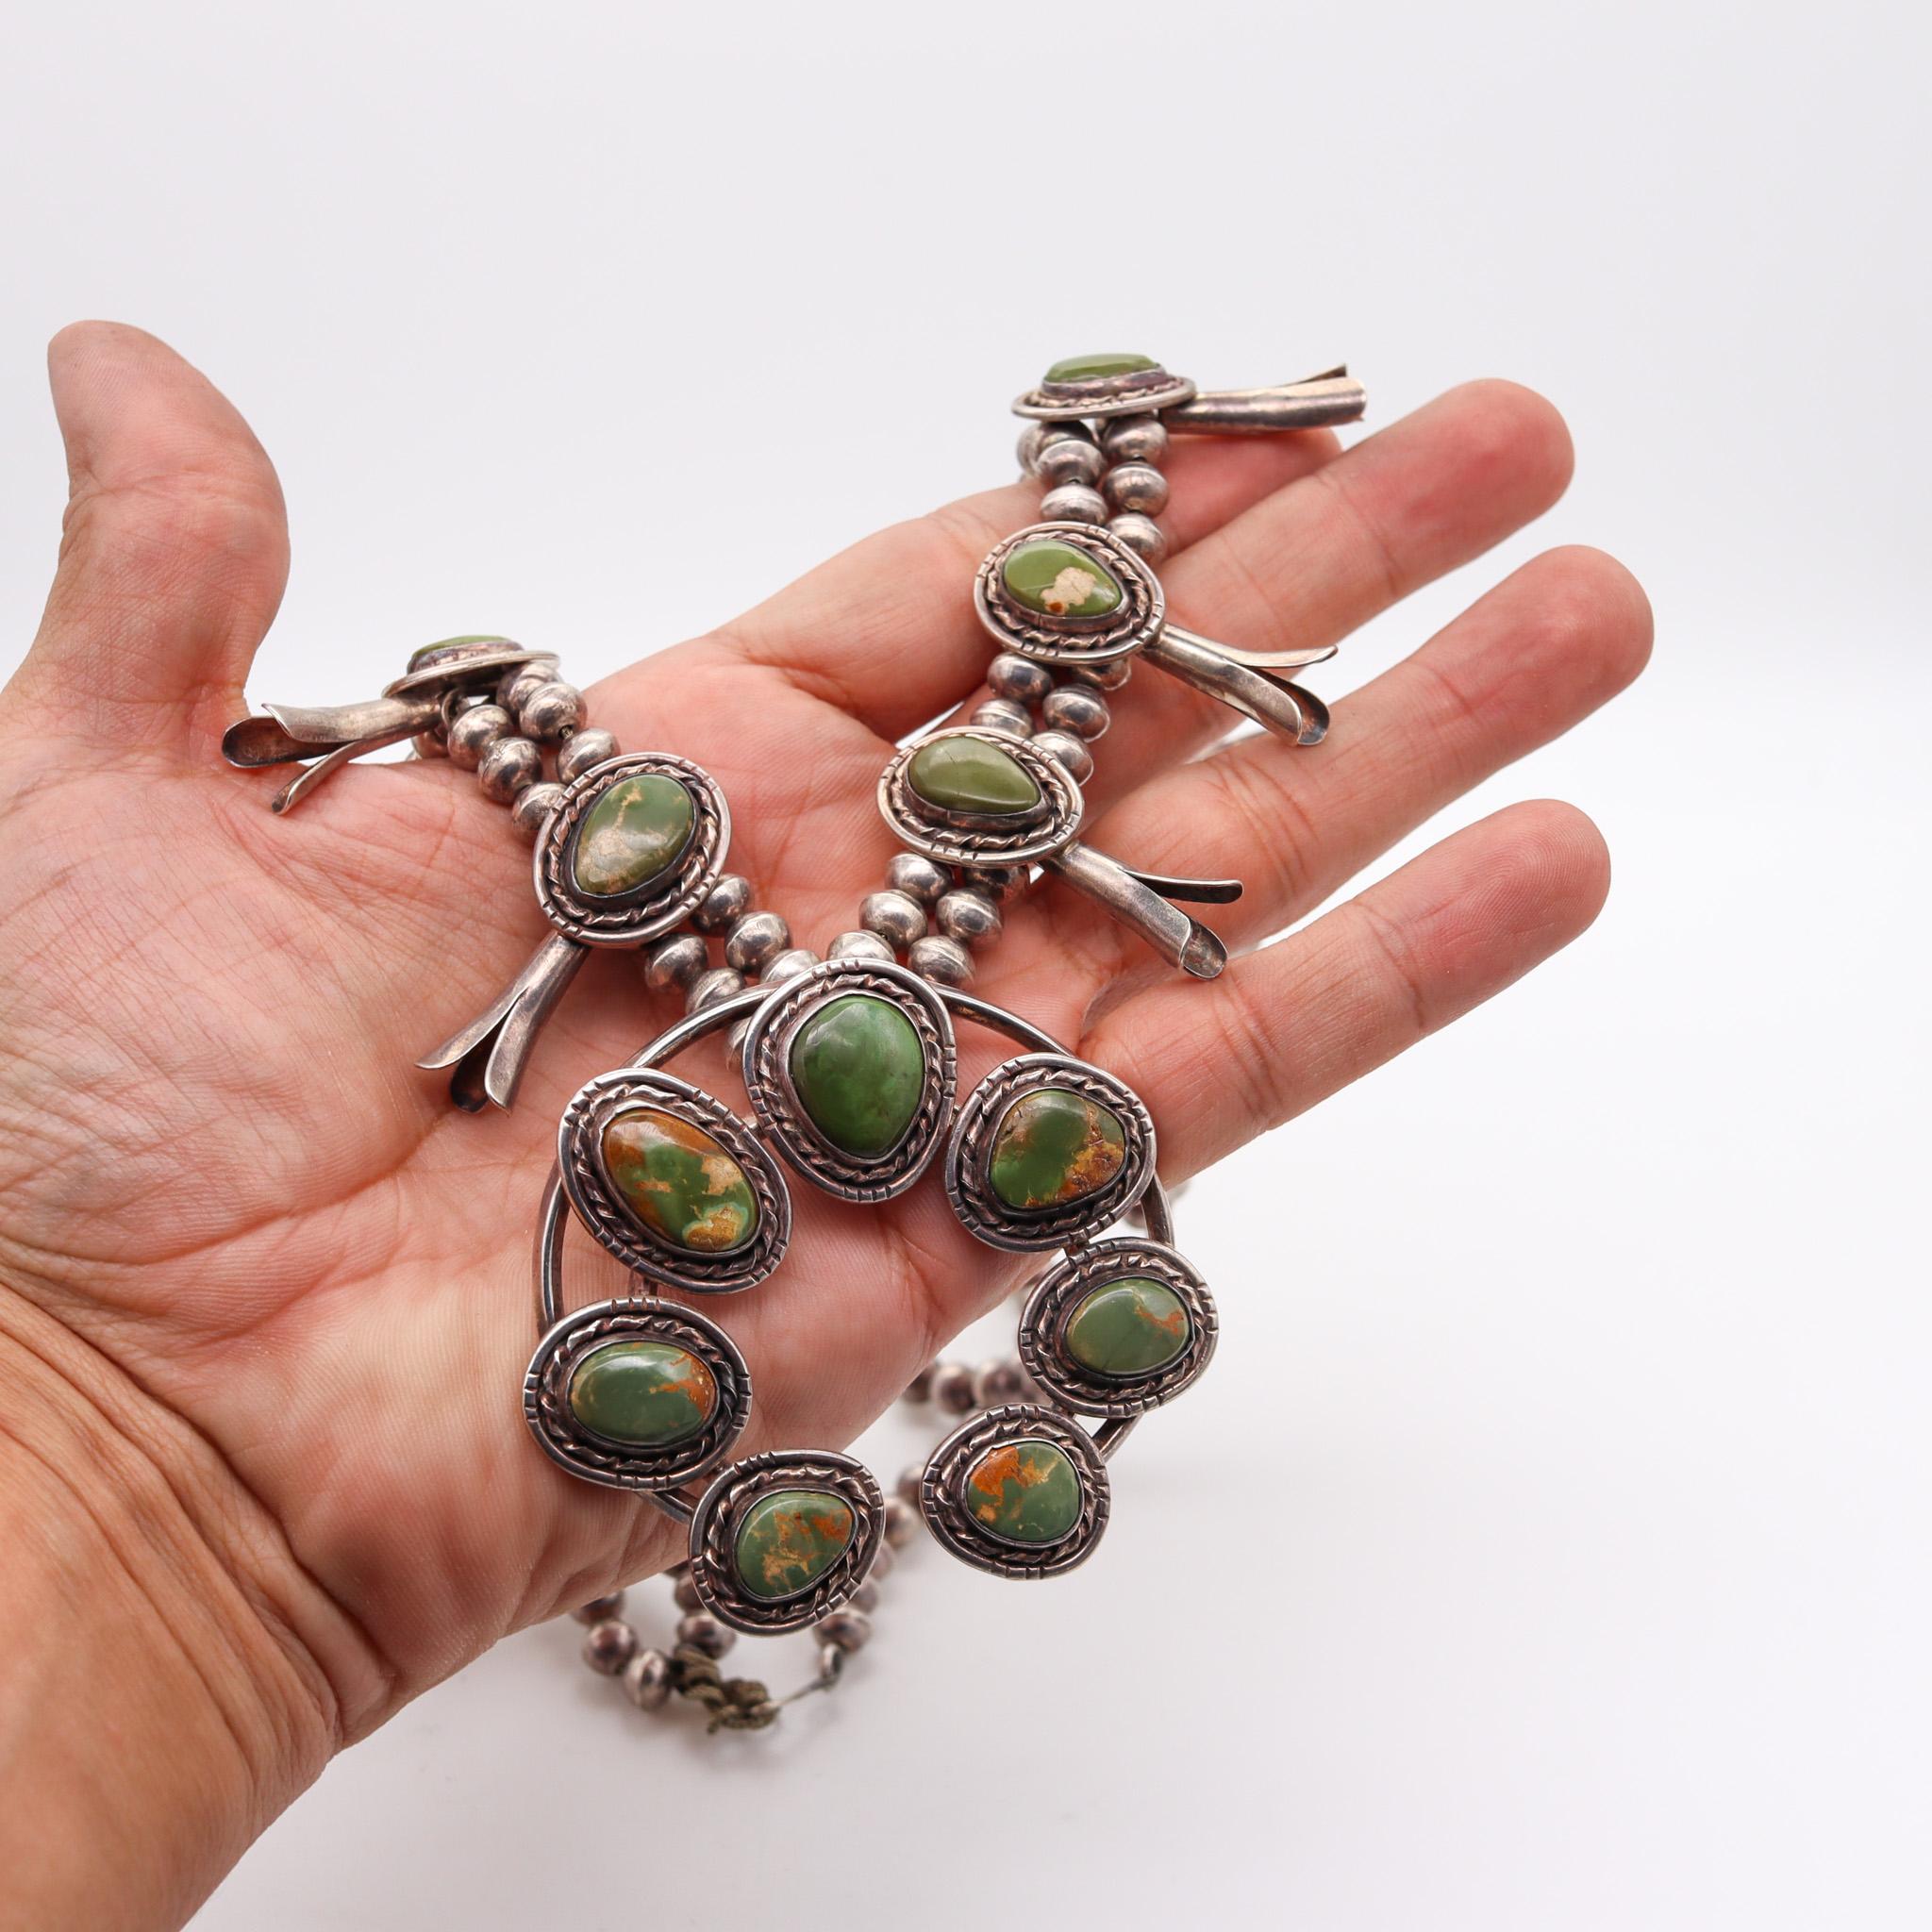 Cabochon Native American Navajo 1950 Squash Blossom Necklace Sterling and Green Turquoise For Sale